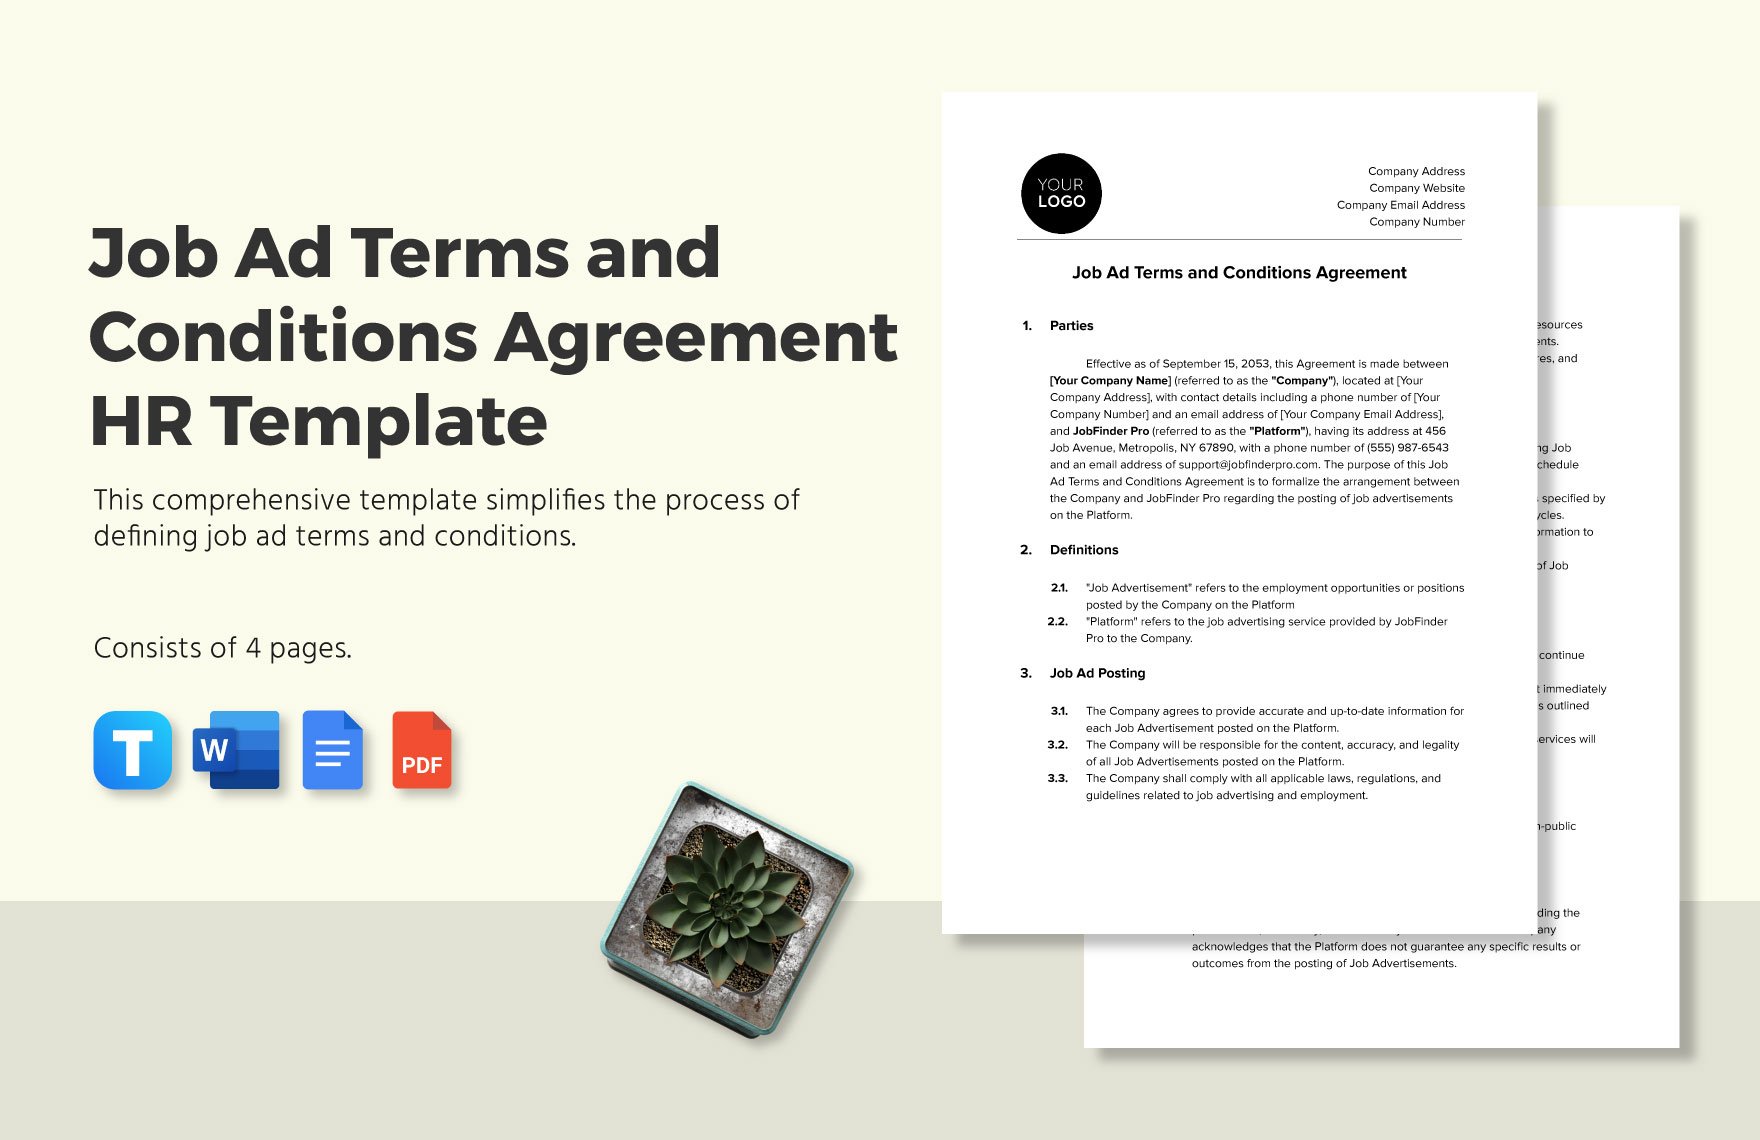 Job Ad Terms and Conditions Agreement HR Template in Word, Google Docs, PDF